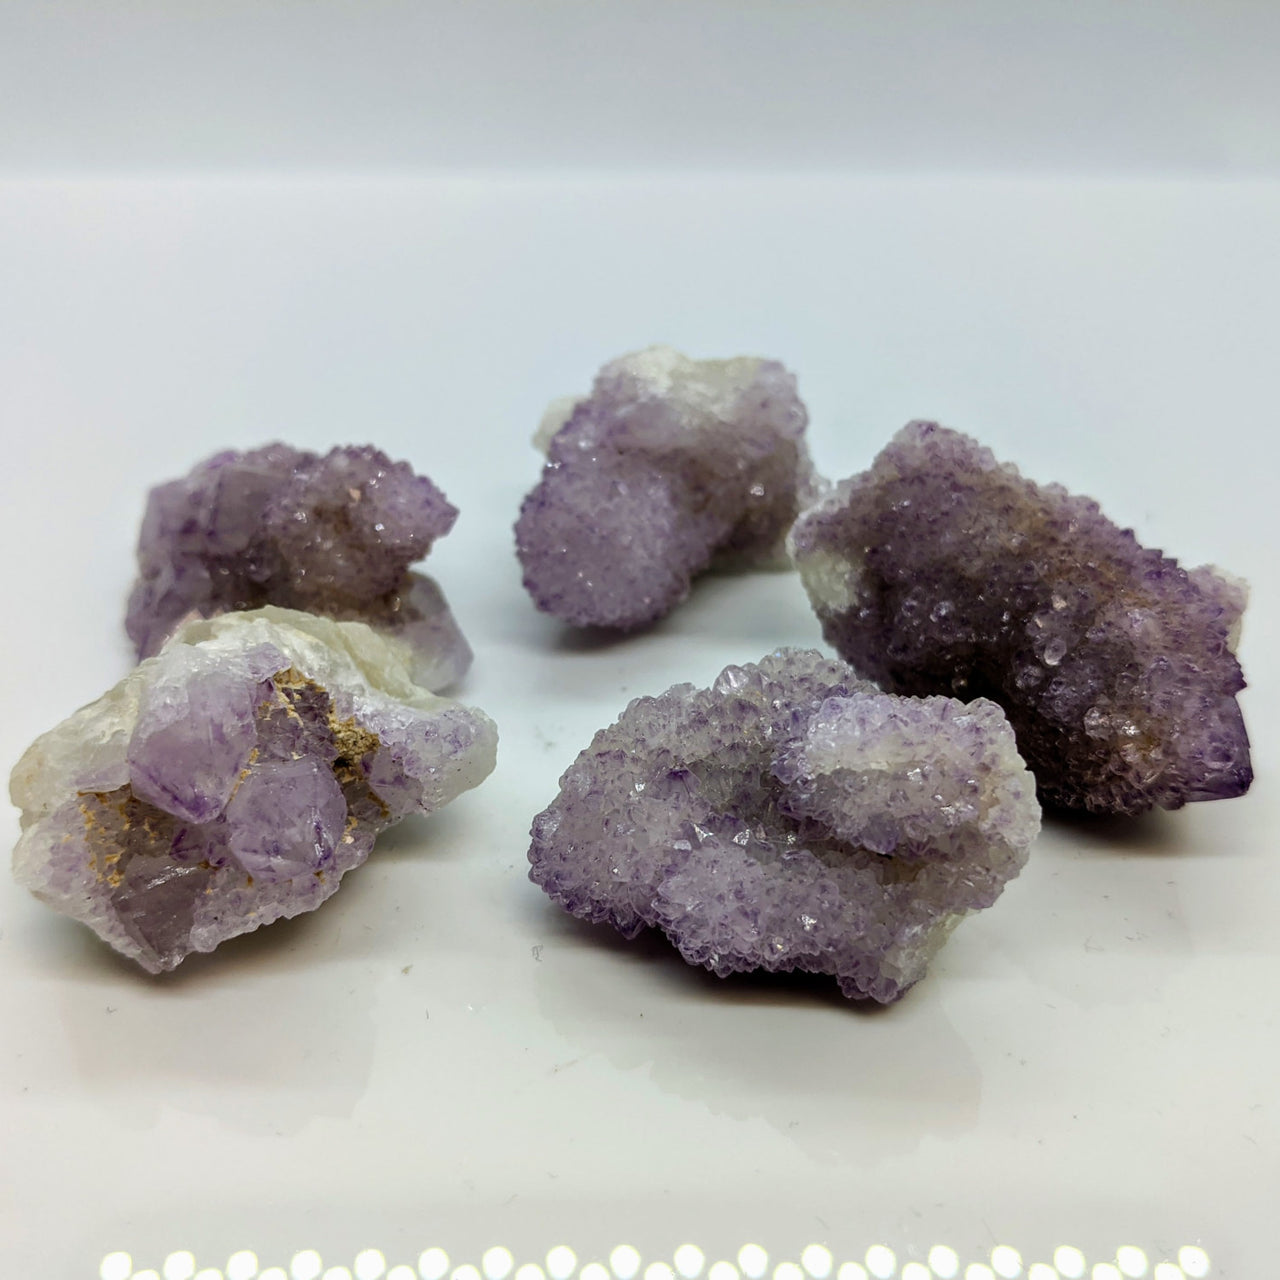 Spirit Quartz aka Amethyst Cactus Rough Cluster #LV0024 on white plate with amethyst crystals